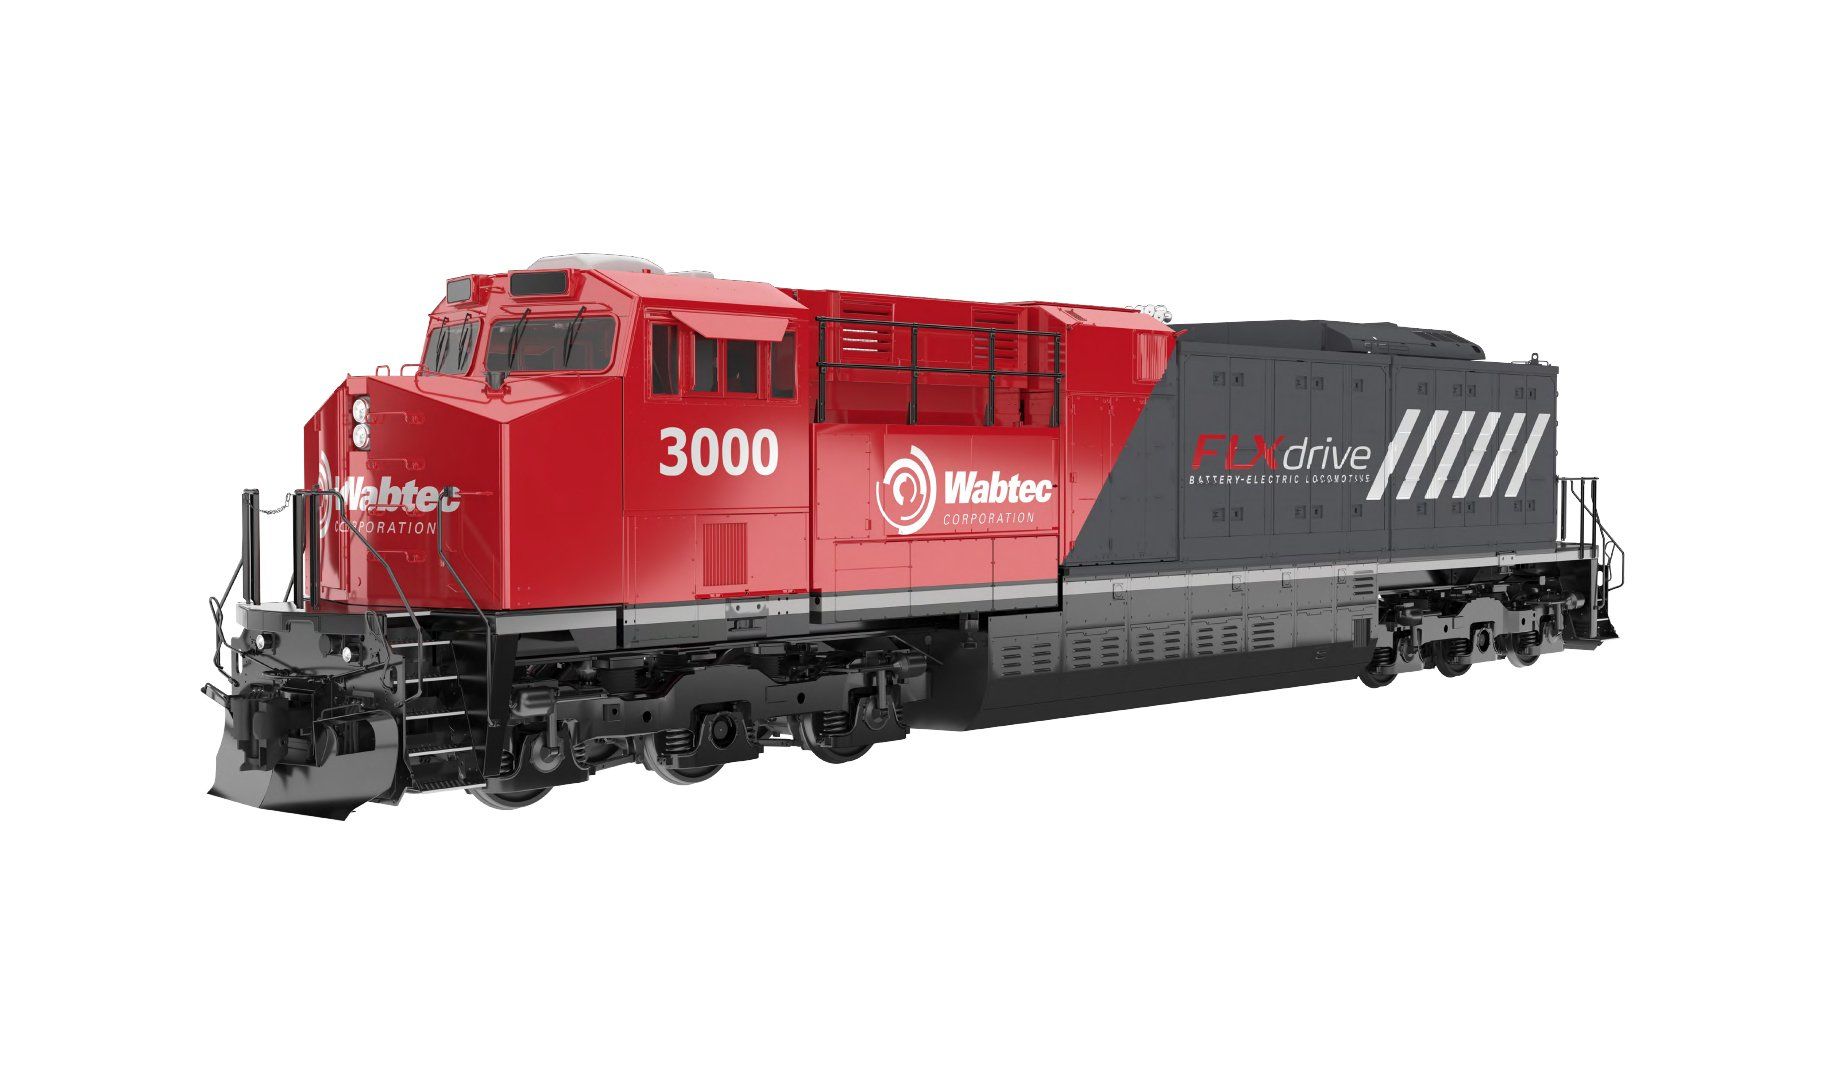 First battery-electric freight train: Wabtec Corporation sets world record